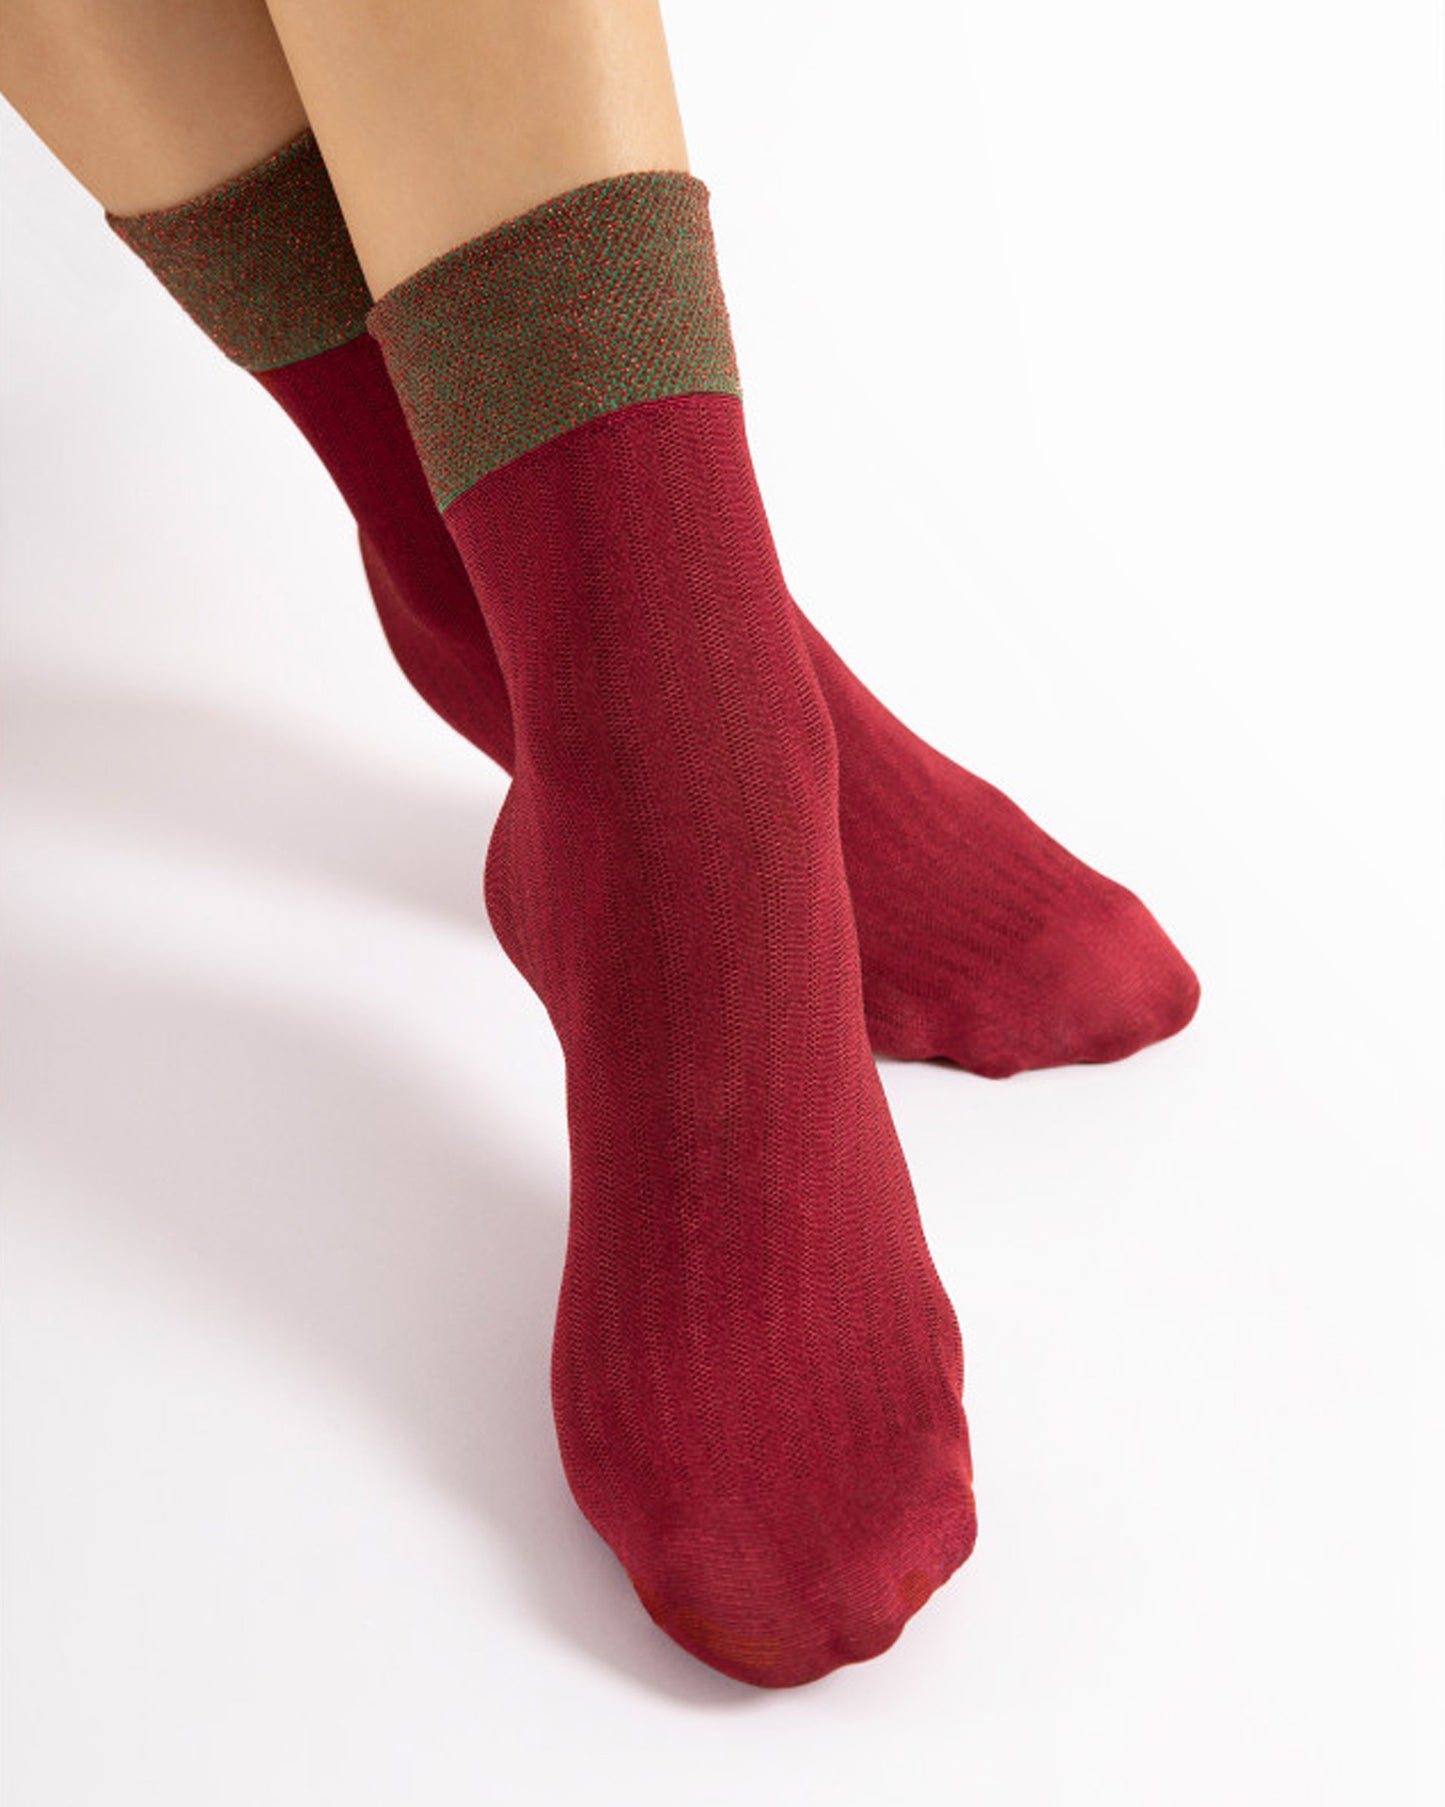 Fiore Gilt Socks - Glossy deep red vertical striped fashion socks with a deep green sparkly lamé cuff.